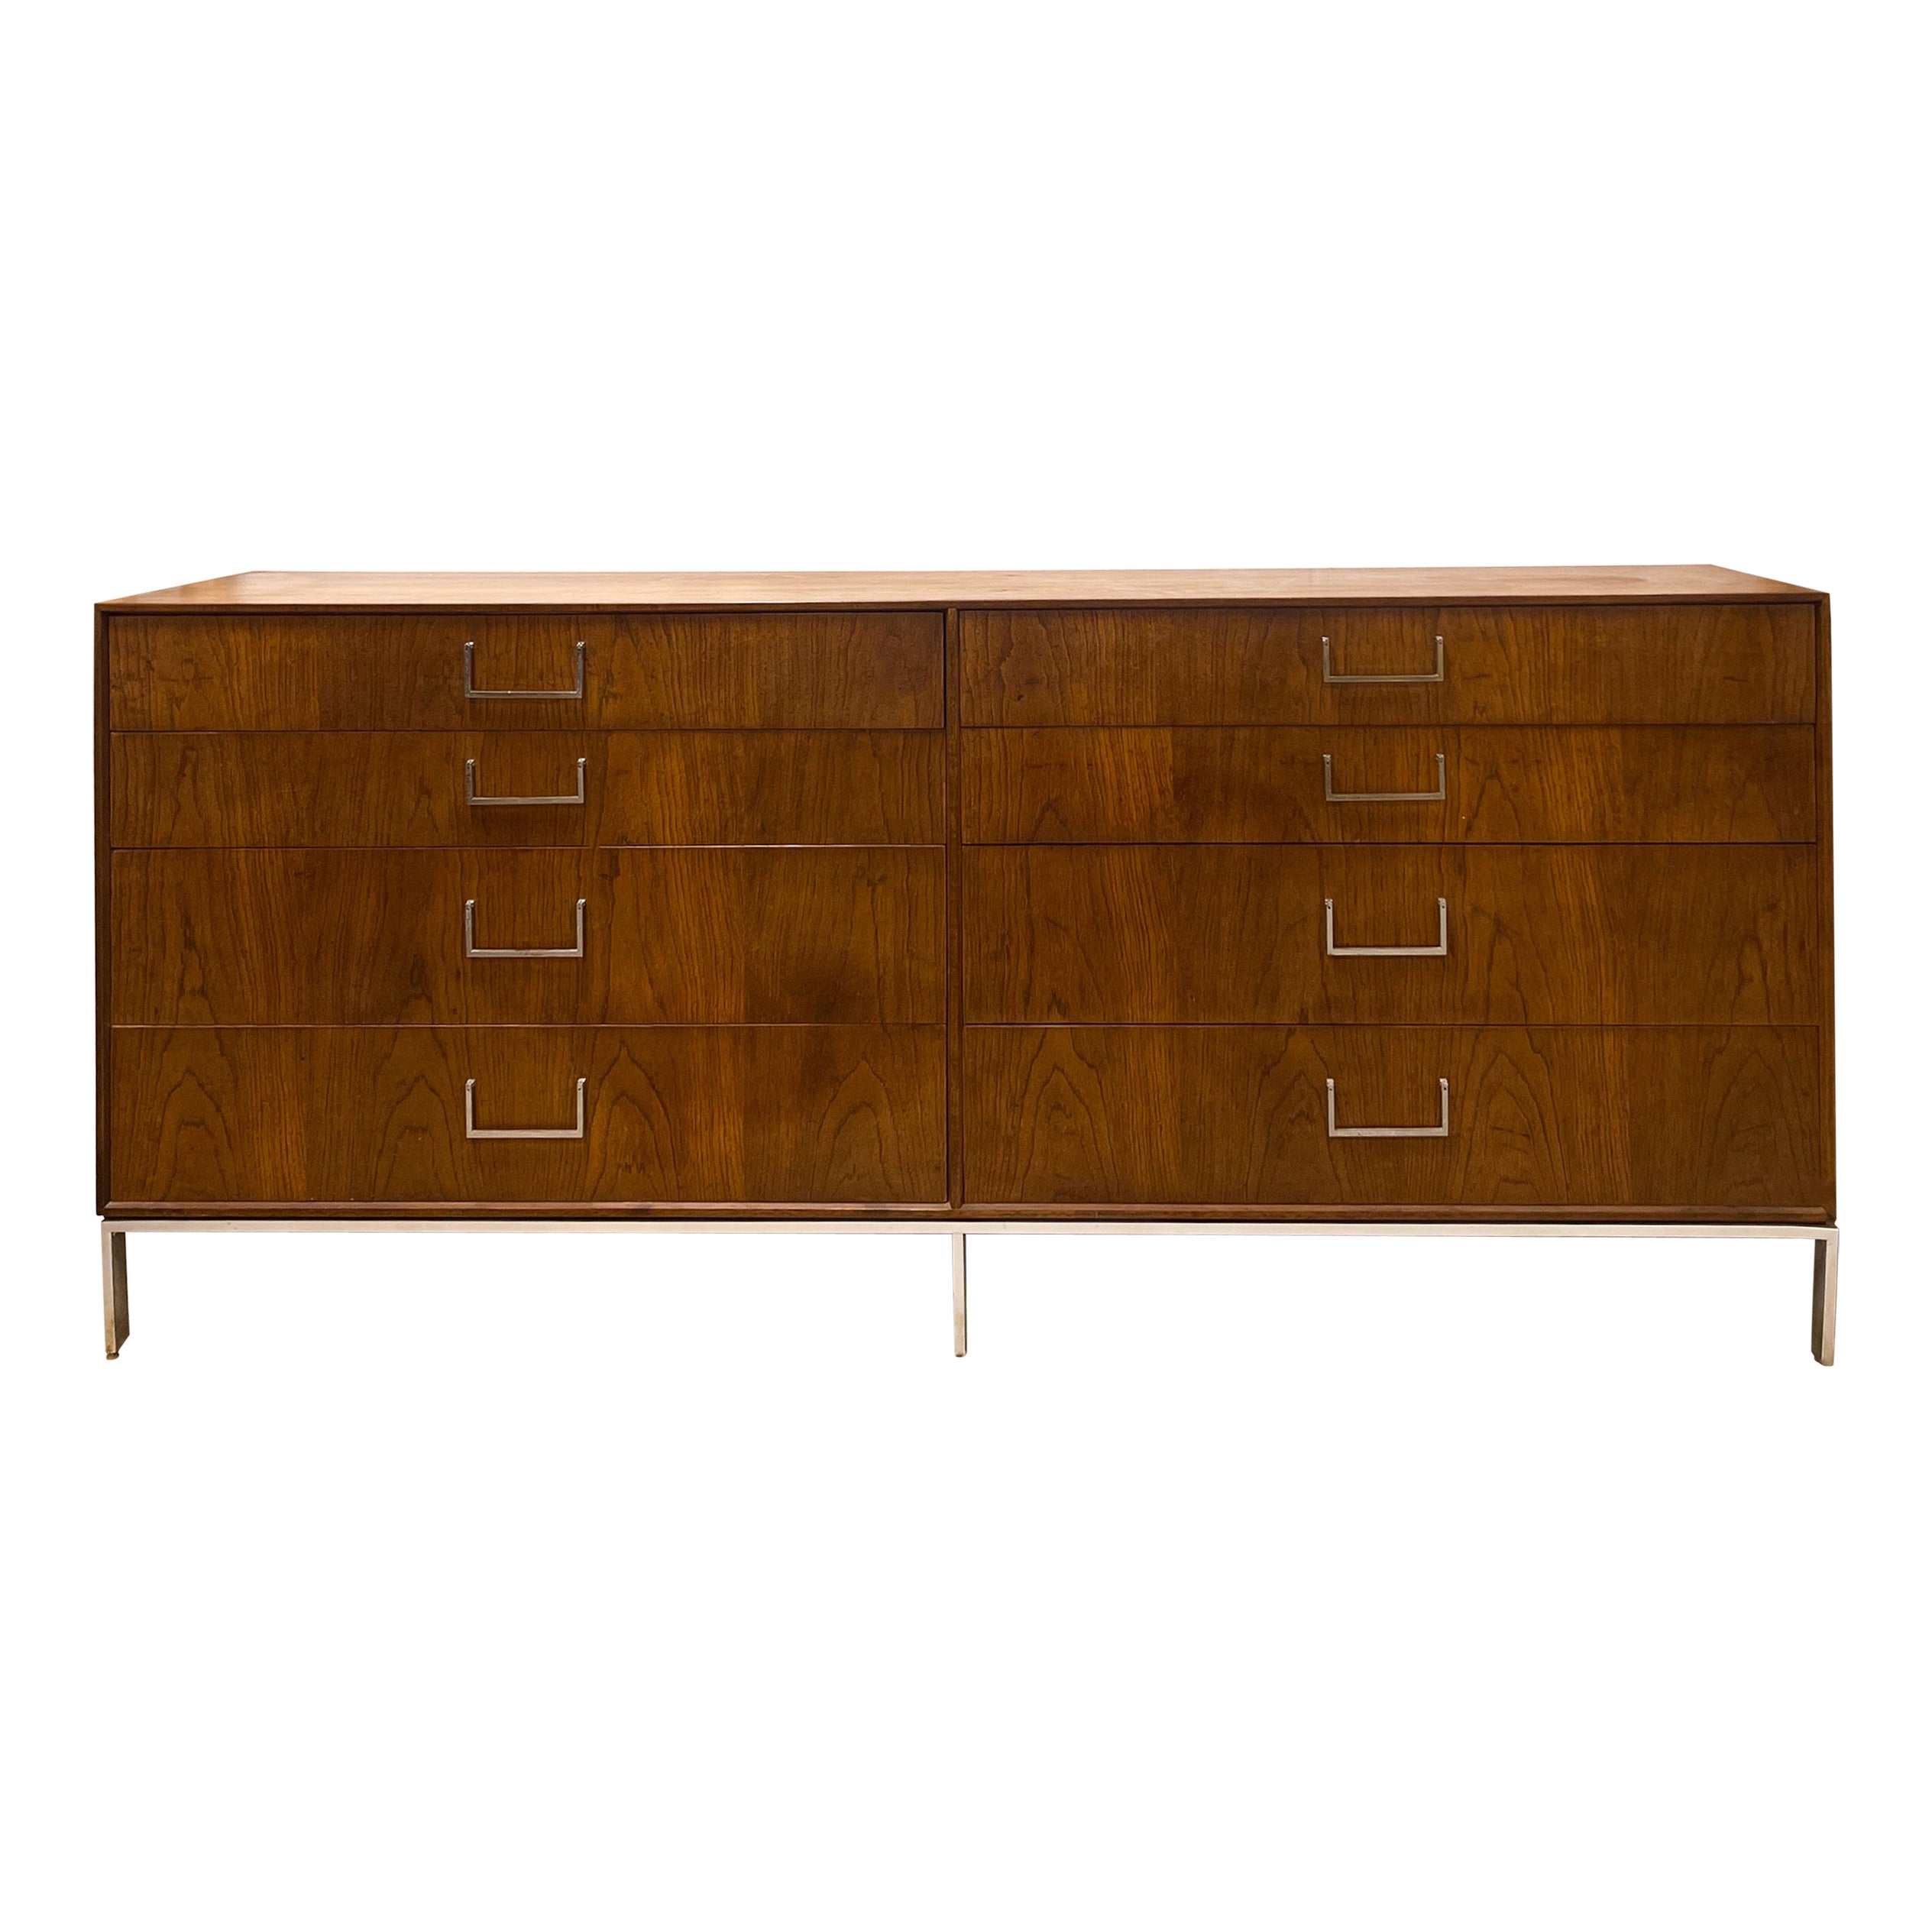 Mid-Century Modern Walnut Credenza / Chest of Drawers Att. to Florence Knoll